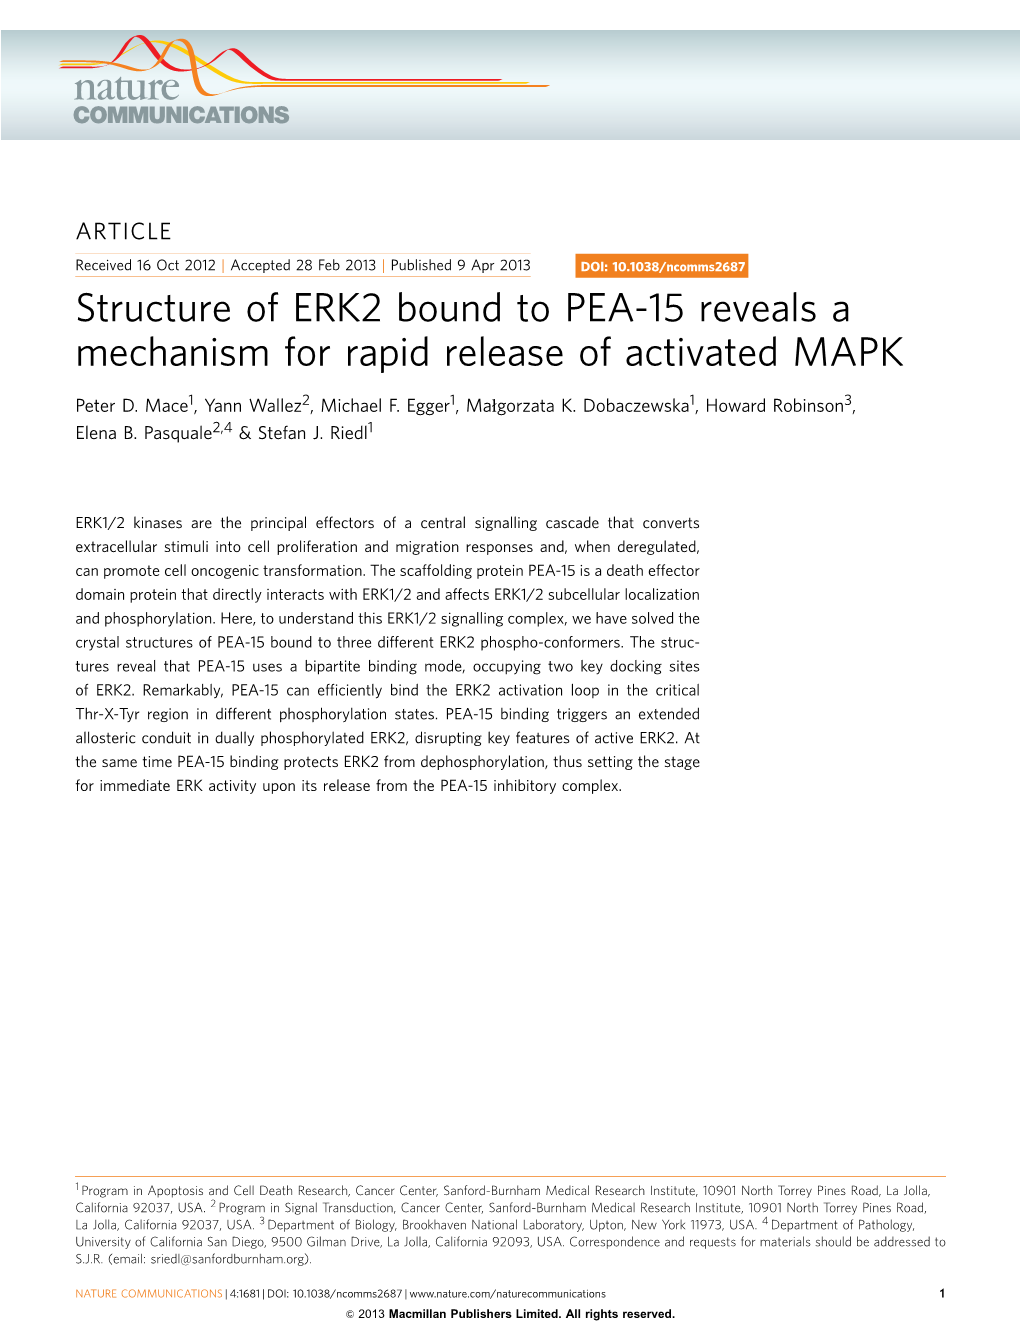 Structure of ERK2 Bound to PEA-15 Reveals a Mechanism for Rapid Release of Activated MAPK